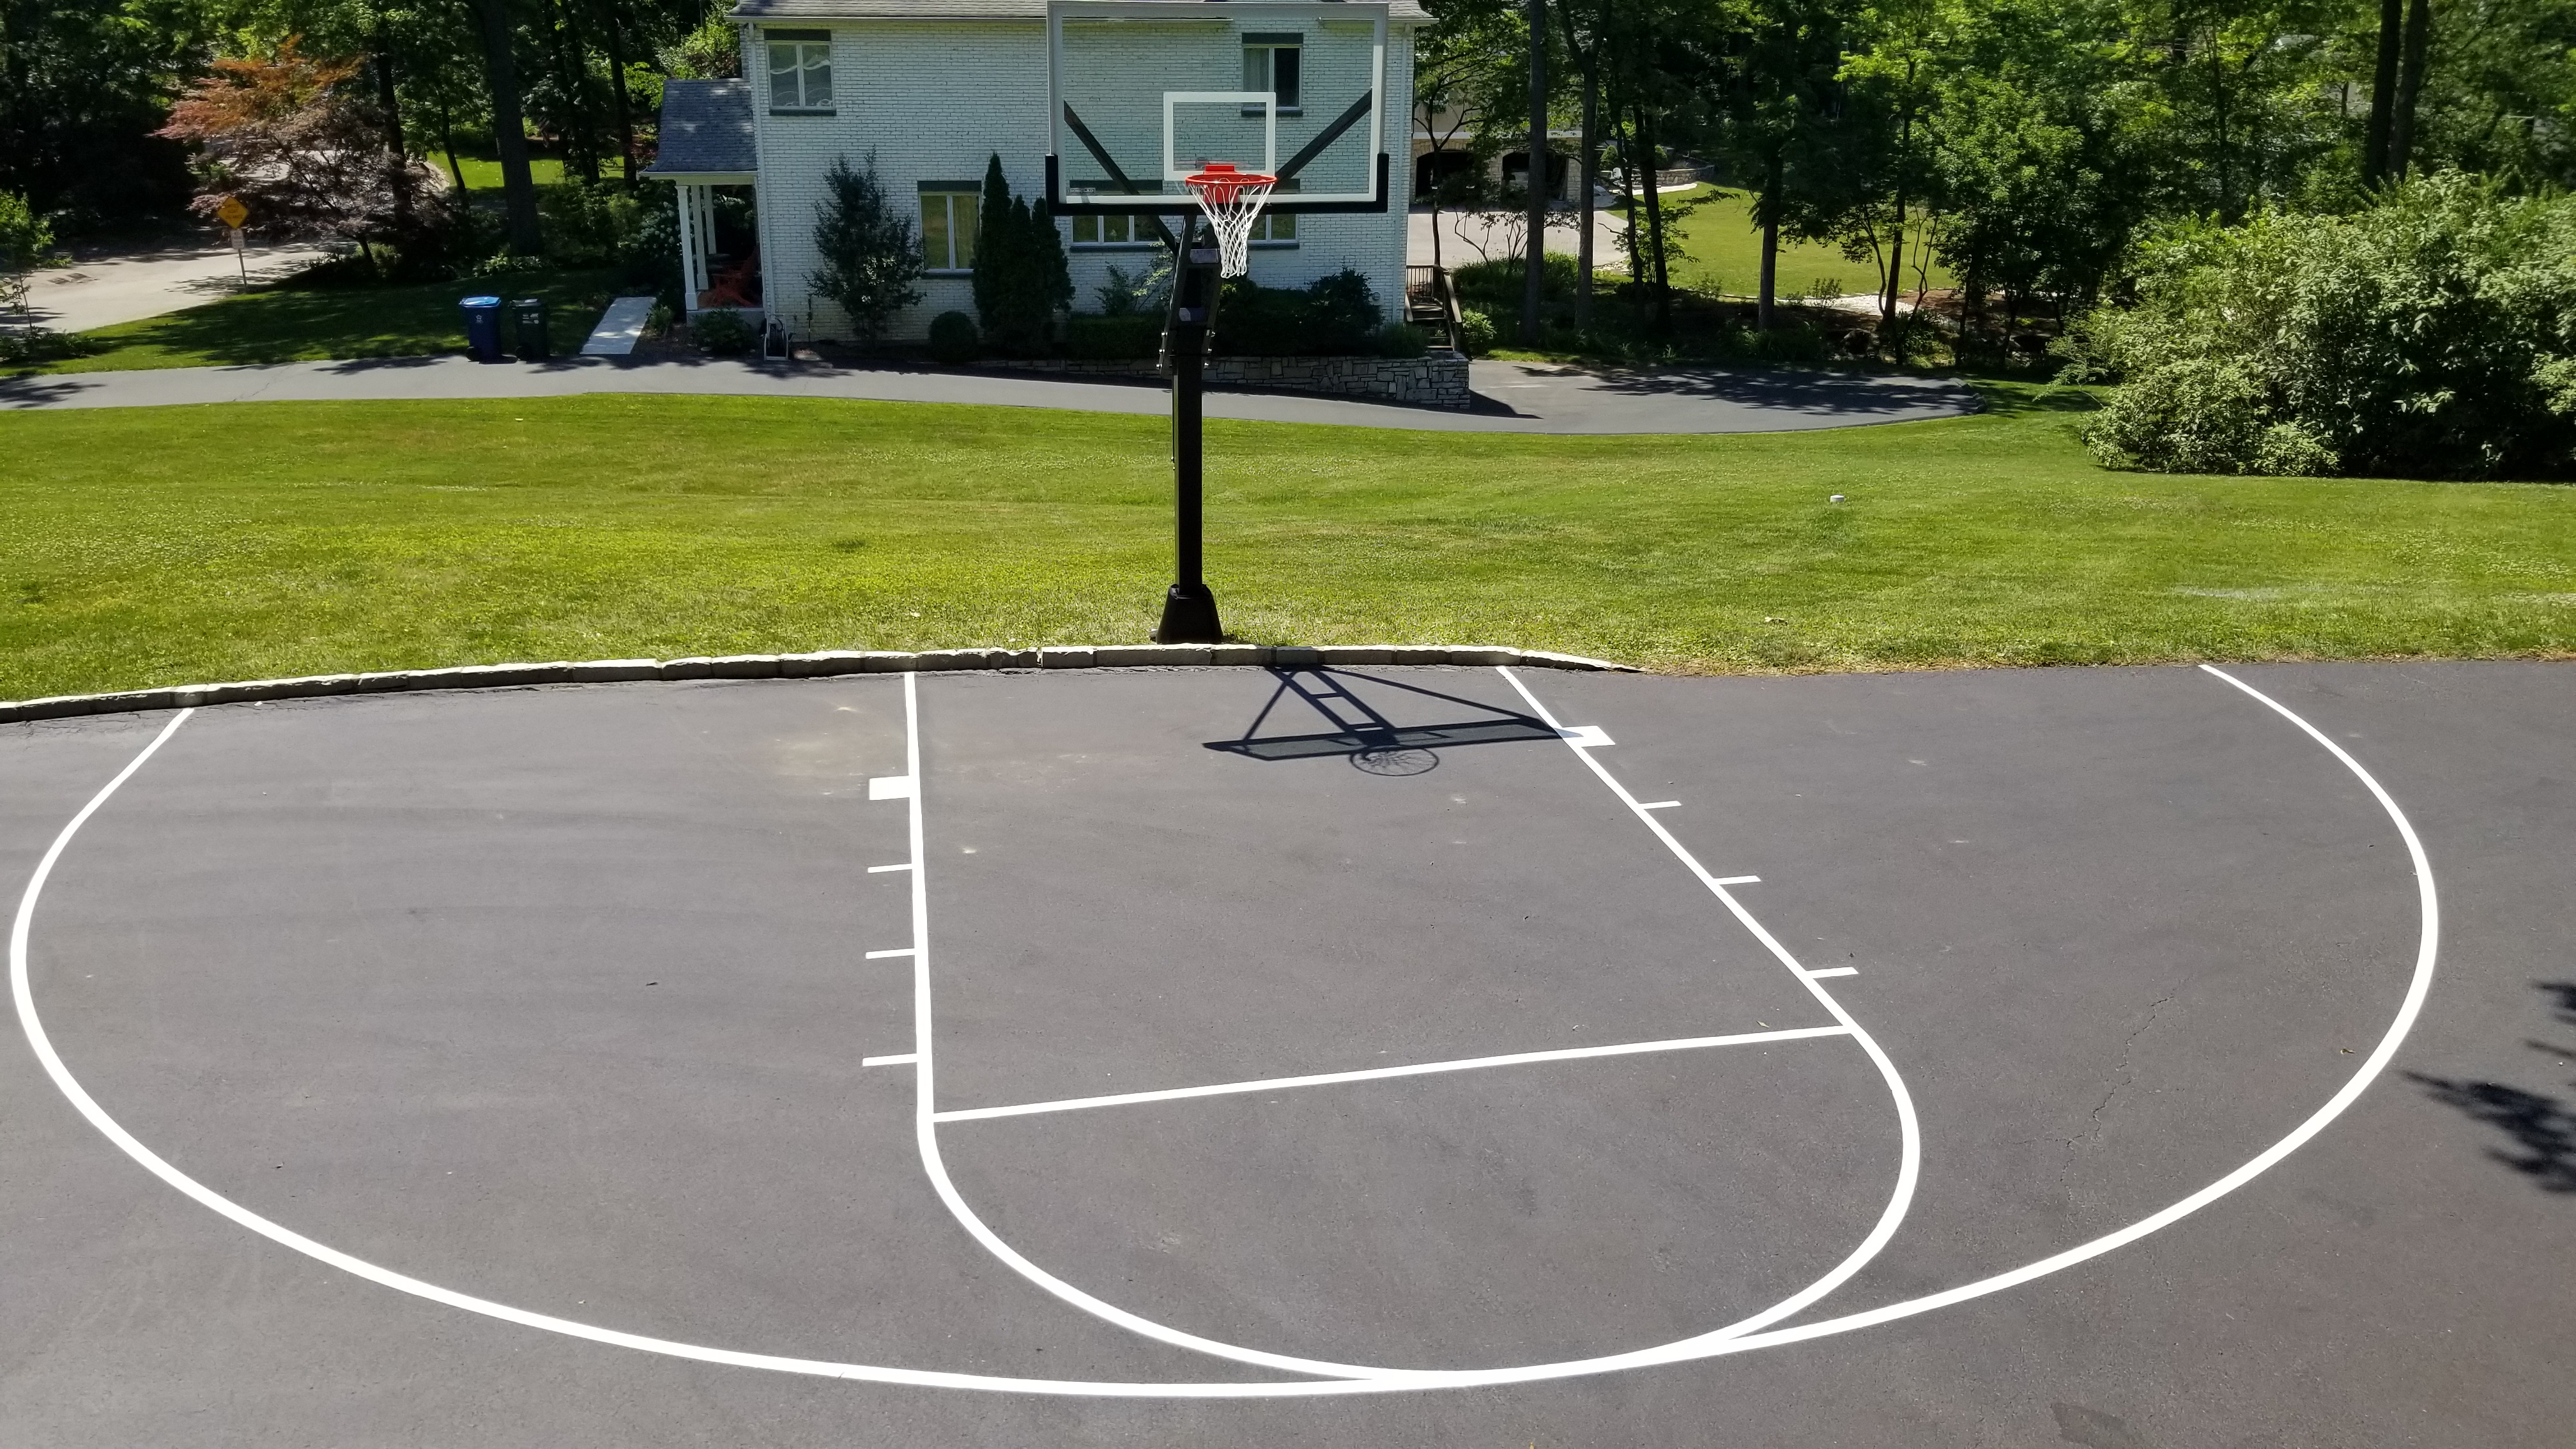 Driveway Line Painting Precise Assemblies, How To Paint Outdoor Basketball Court Lines